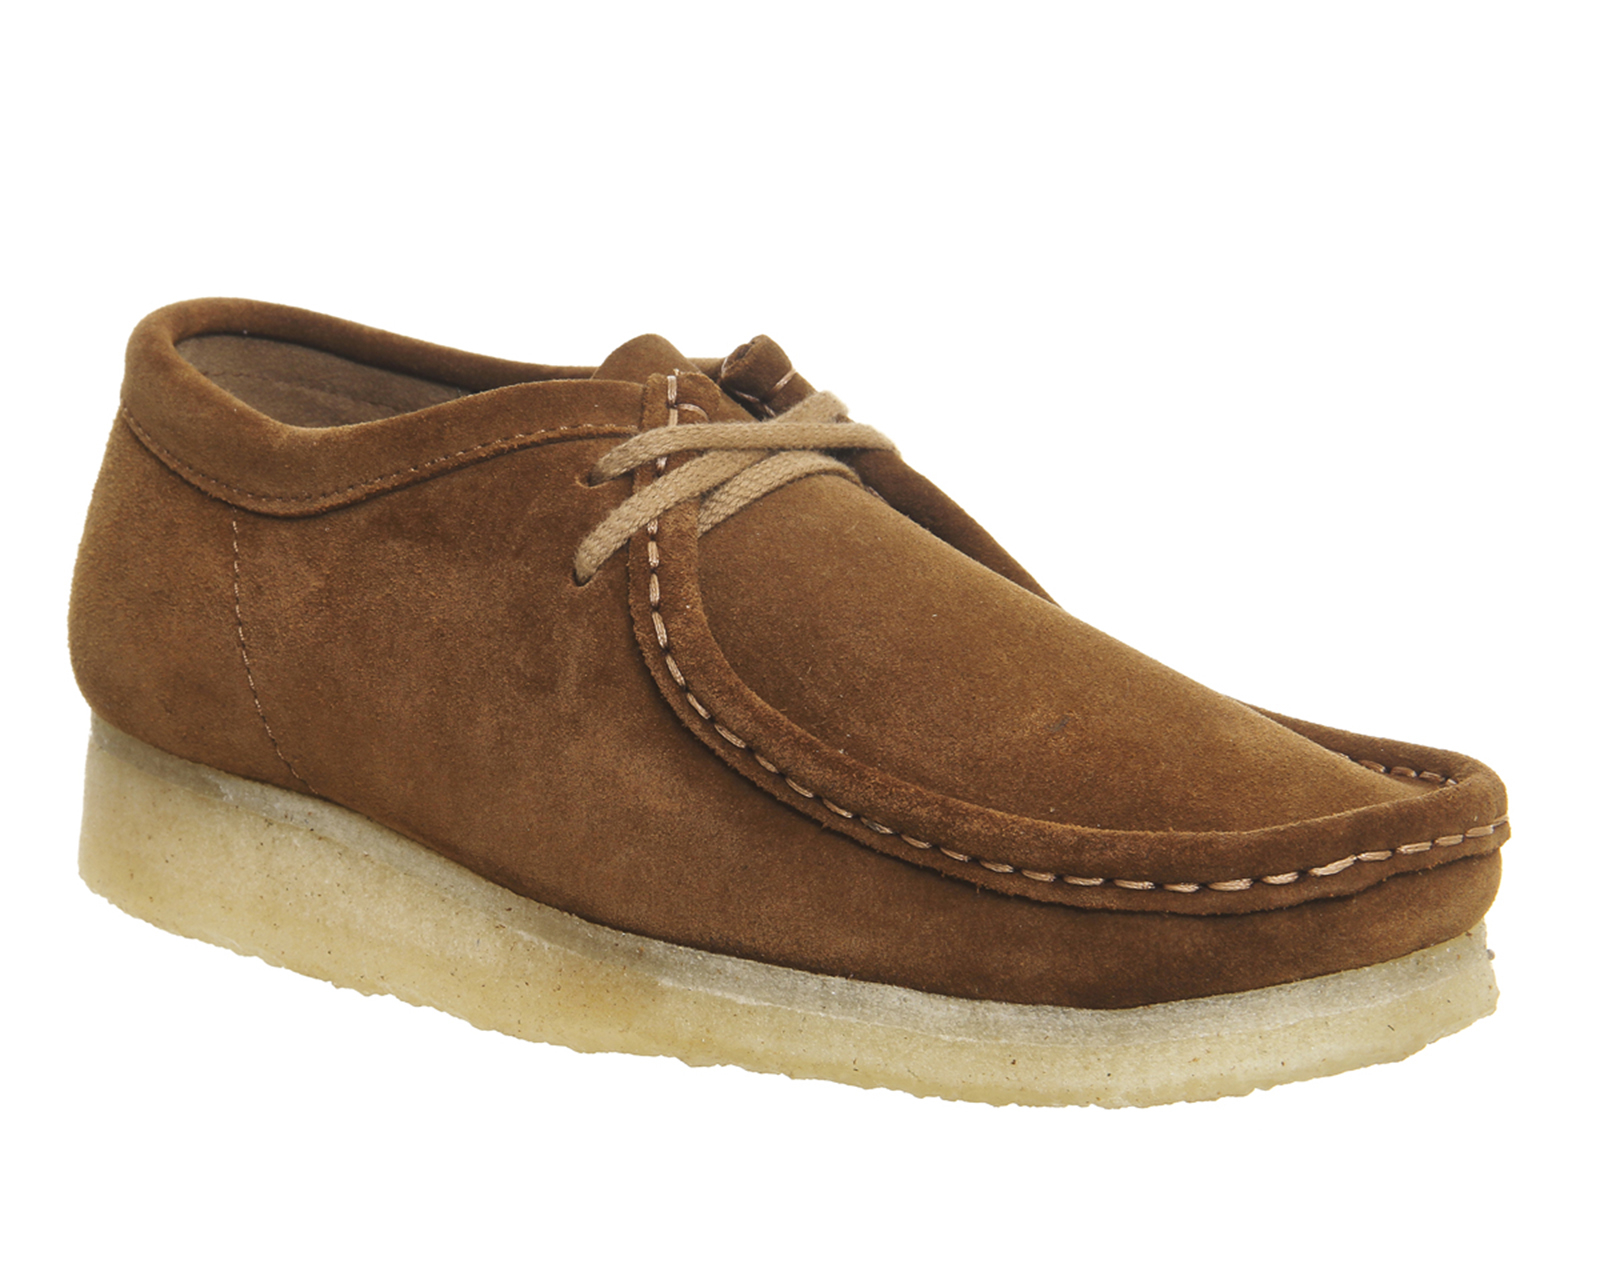 Clarks Suede Wallabee Shoes in Brown for Men - Lyst